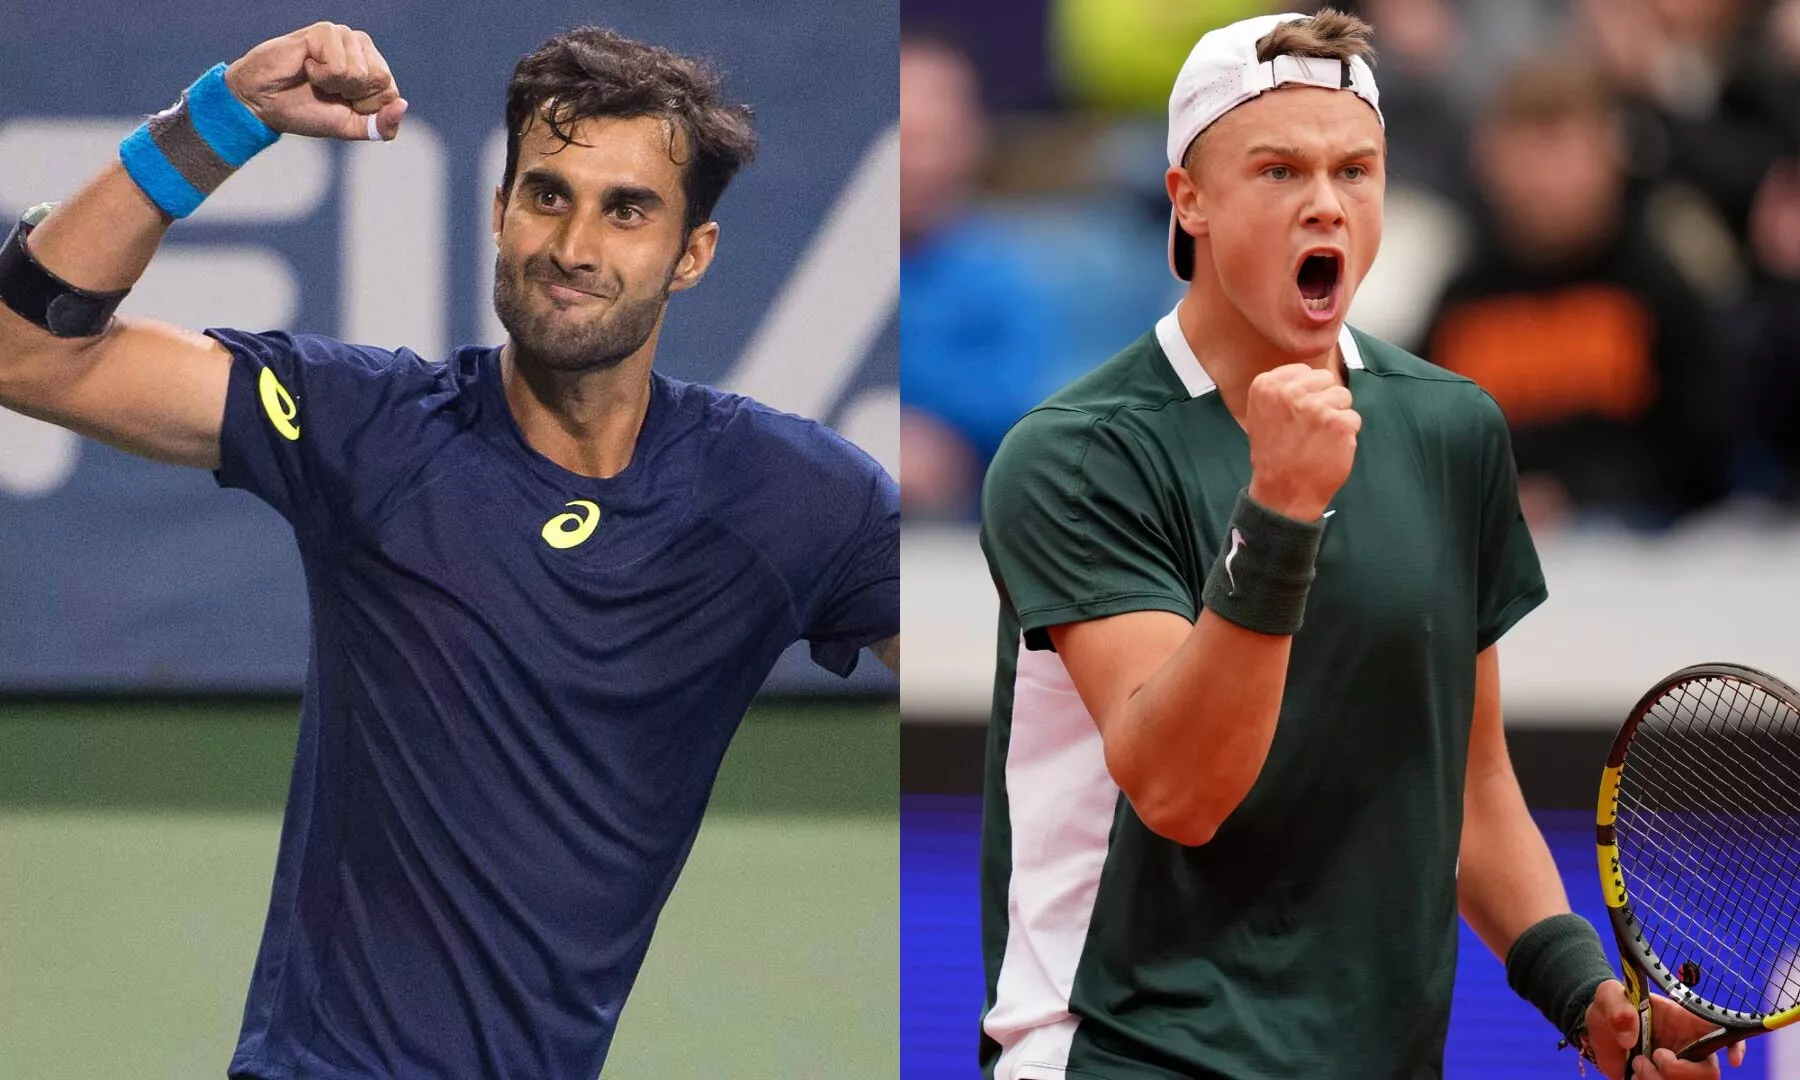 India vs Denmark, Davis Cup World Group I play-off round 1 Sumit Nagal vs August Holmgren live streaming